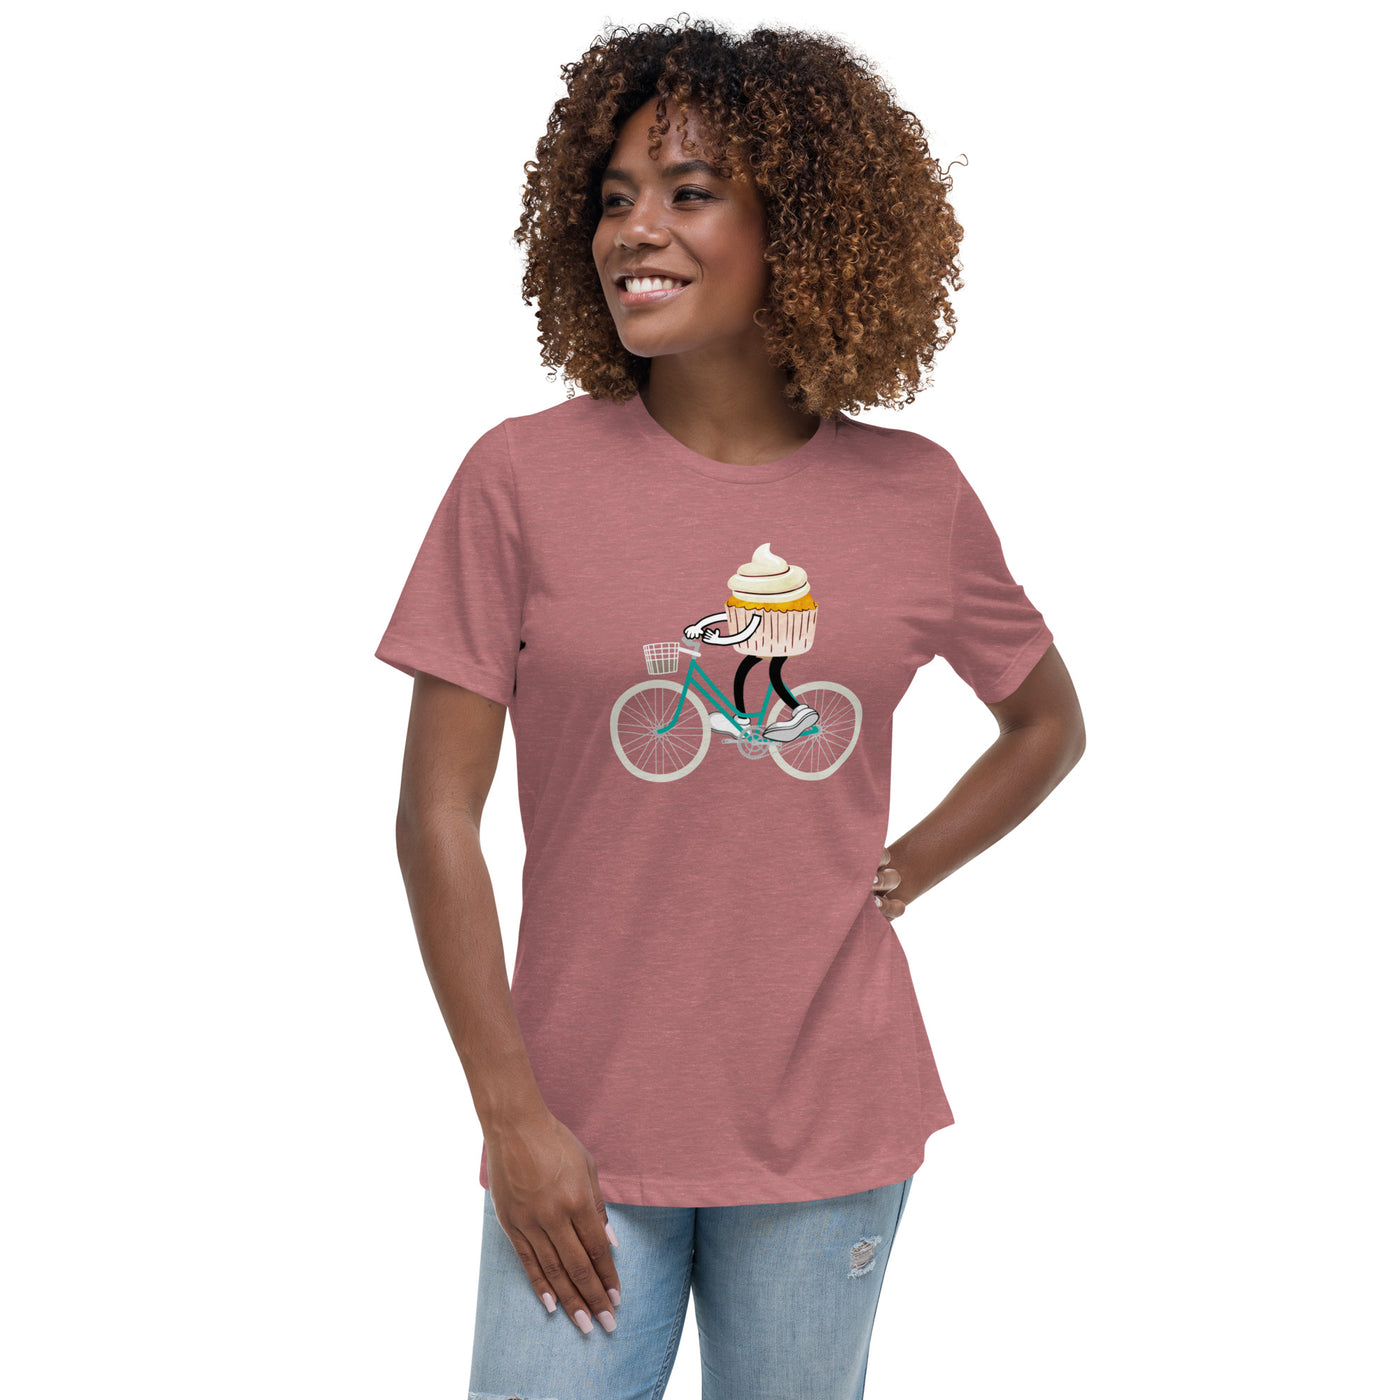 Cupcake on a Bicycle Women's T-Shirt